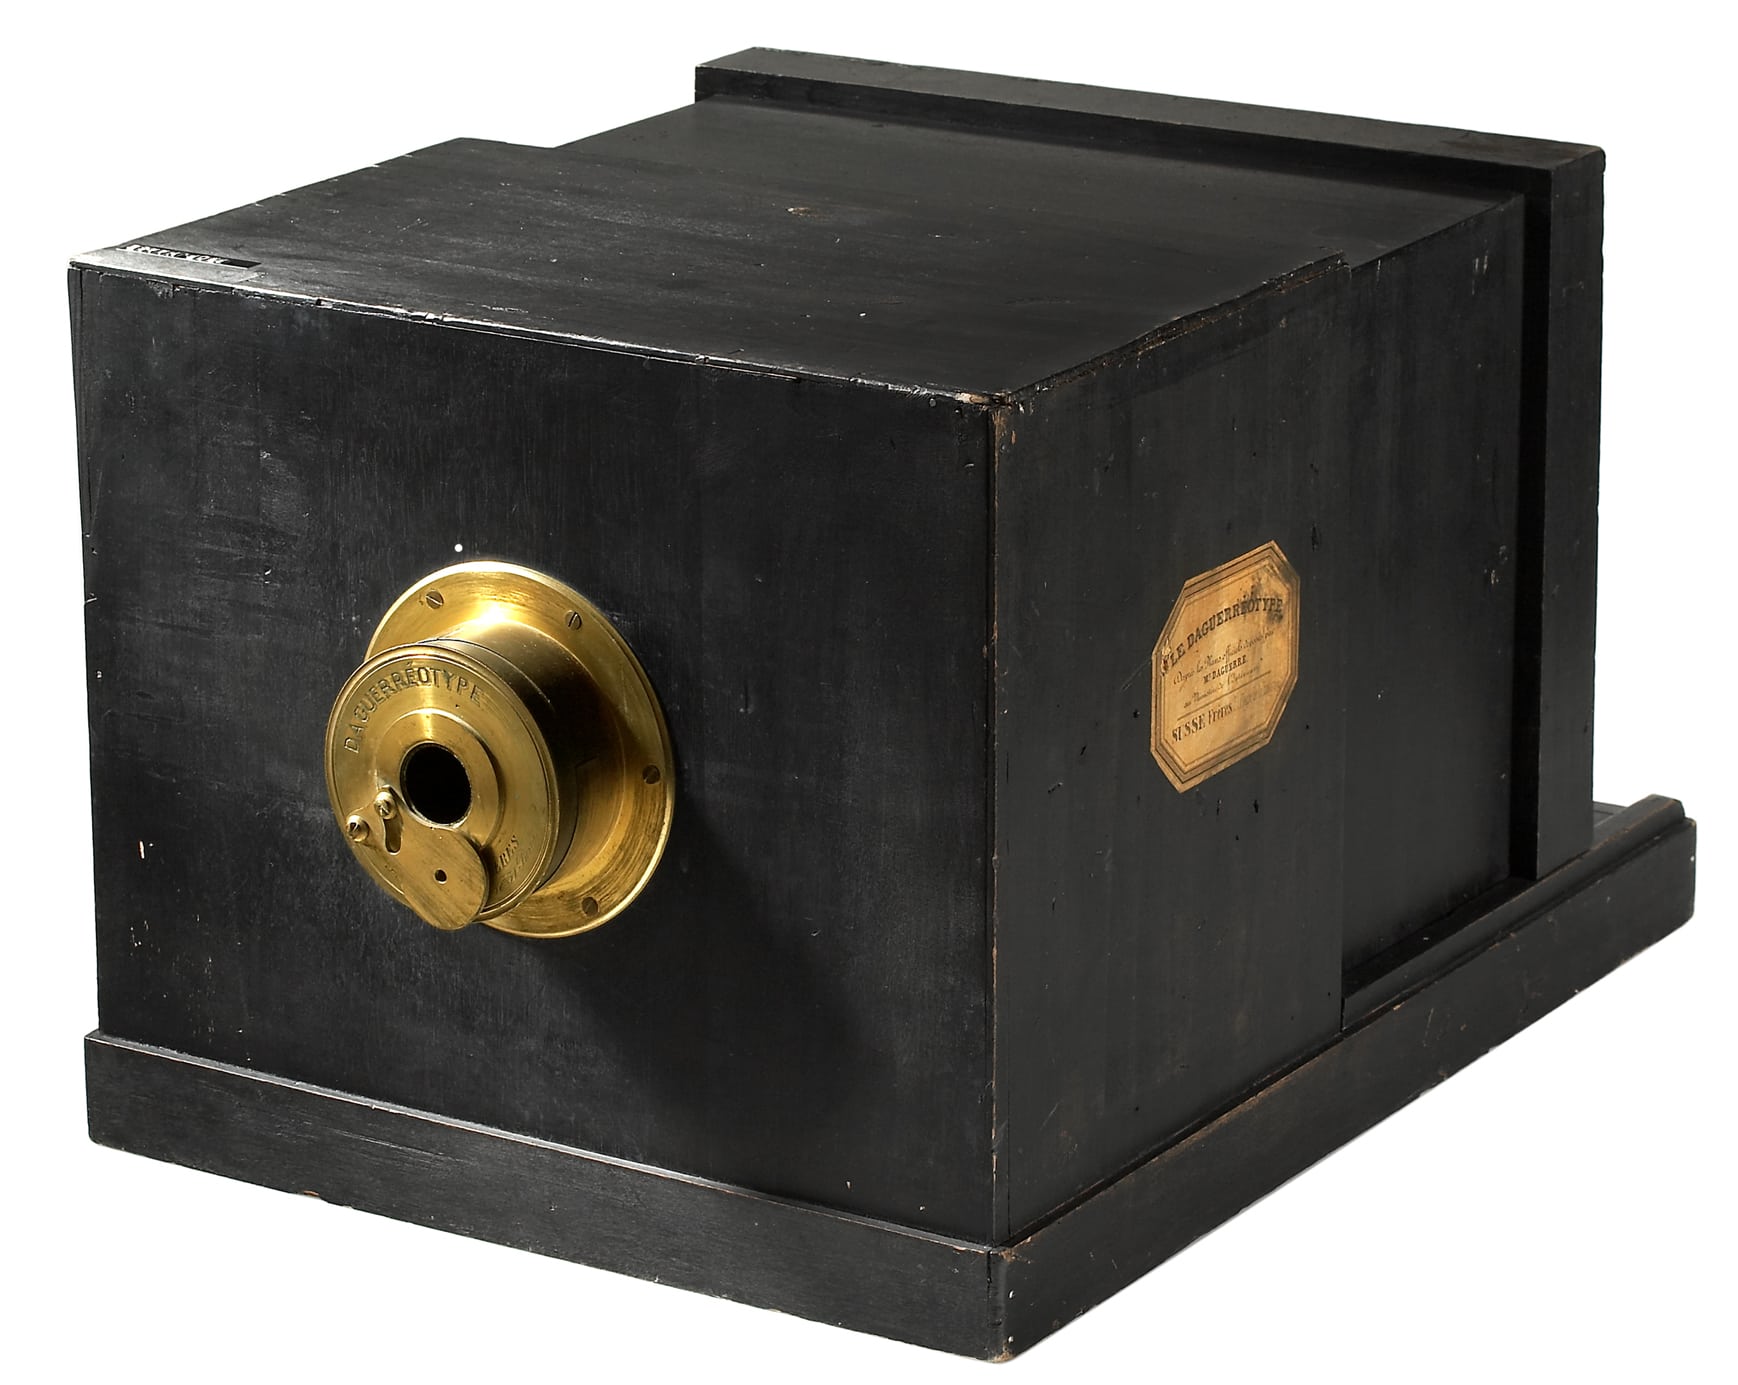 first camera invented by alexander wolcott